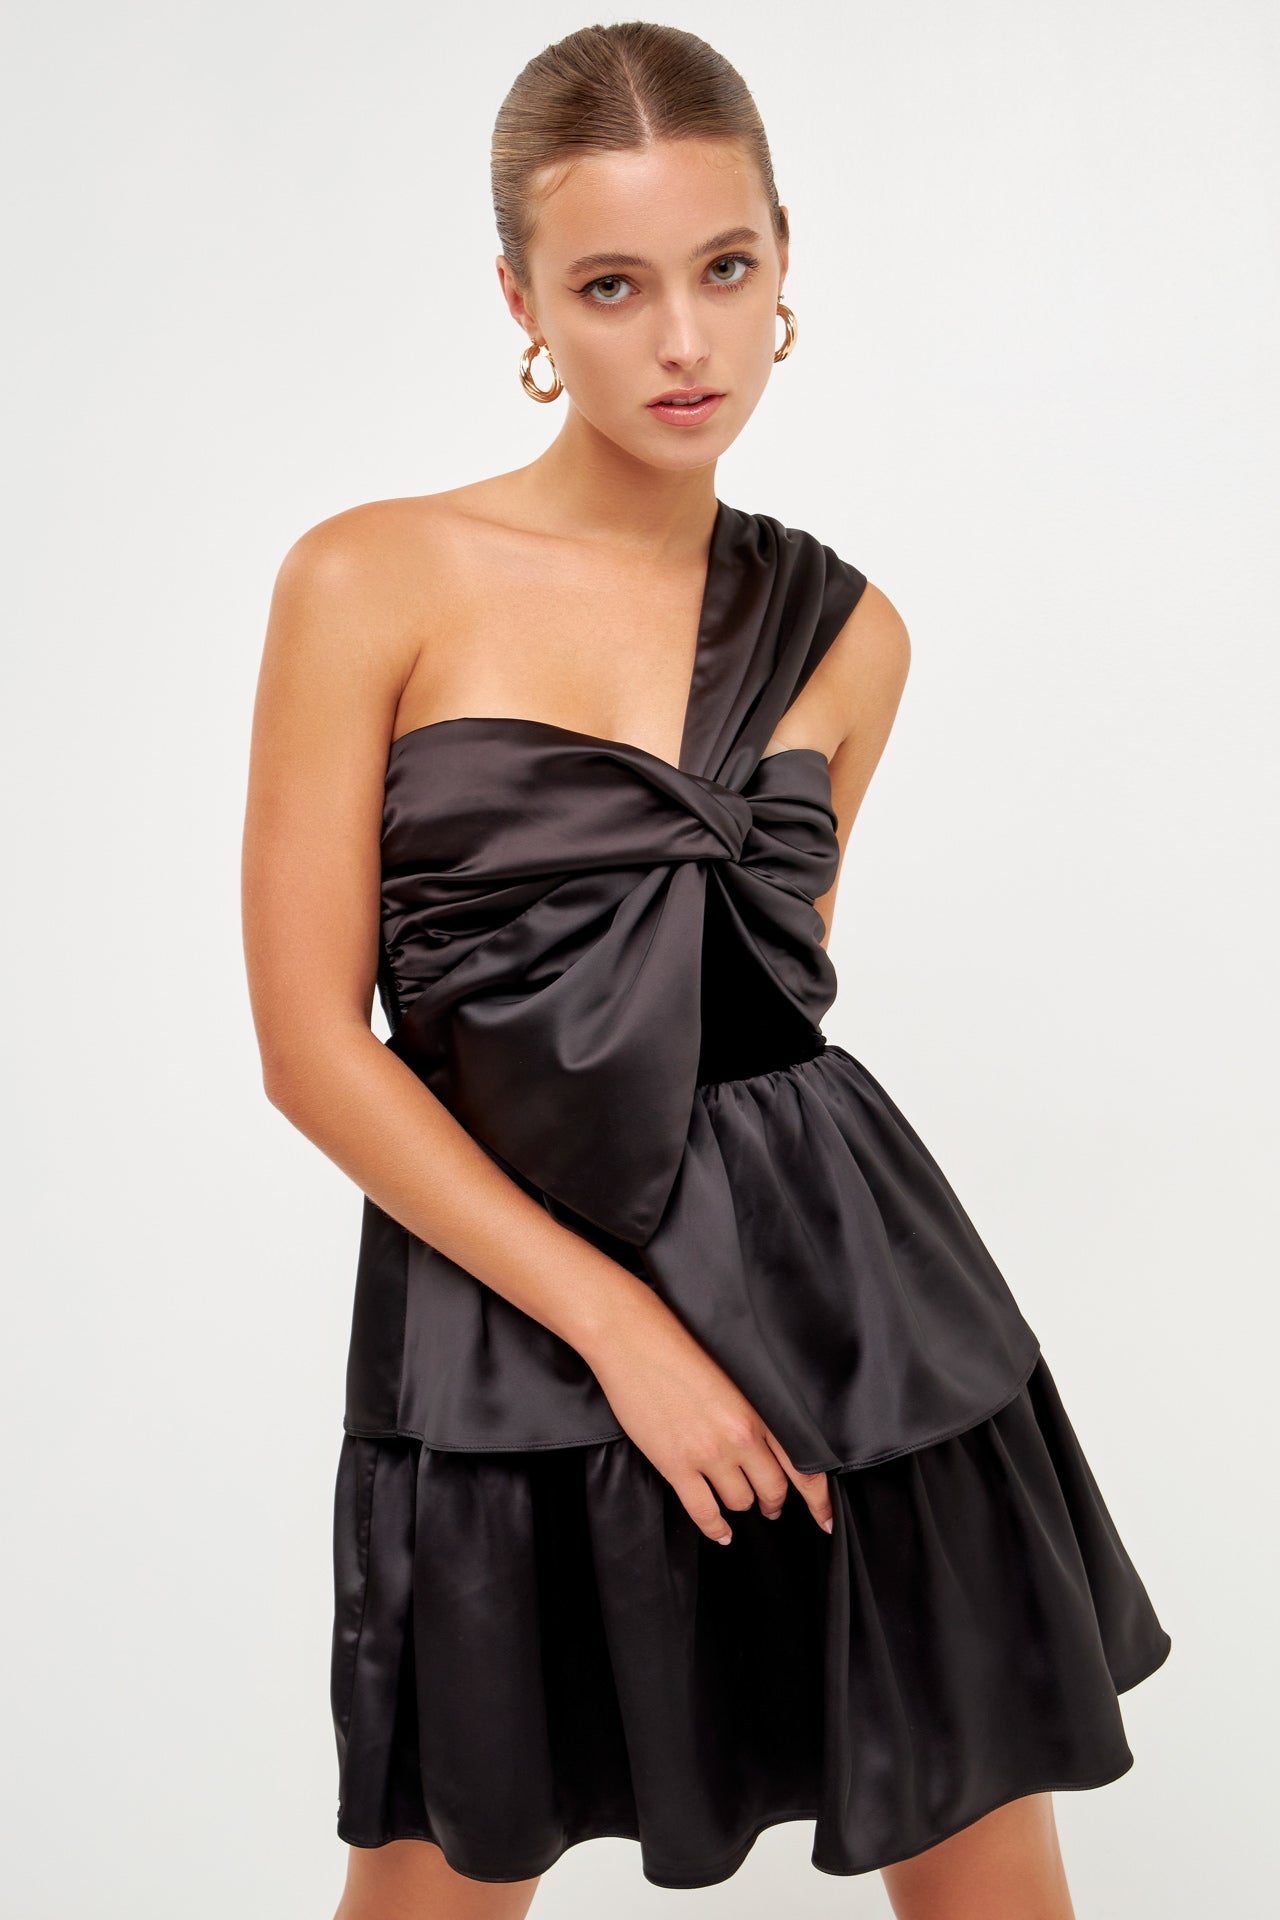 Endless Rose - One-Shoulder Satin Mini Dress - Dresses in Women's Clothing available at endlessrose.com